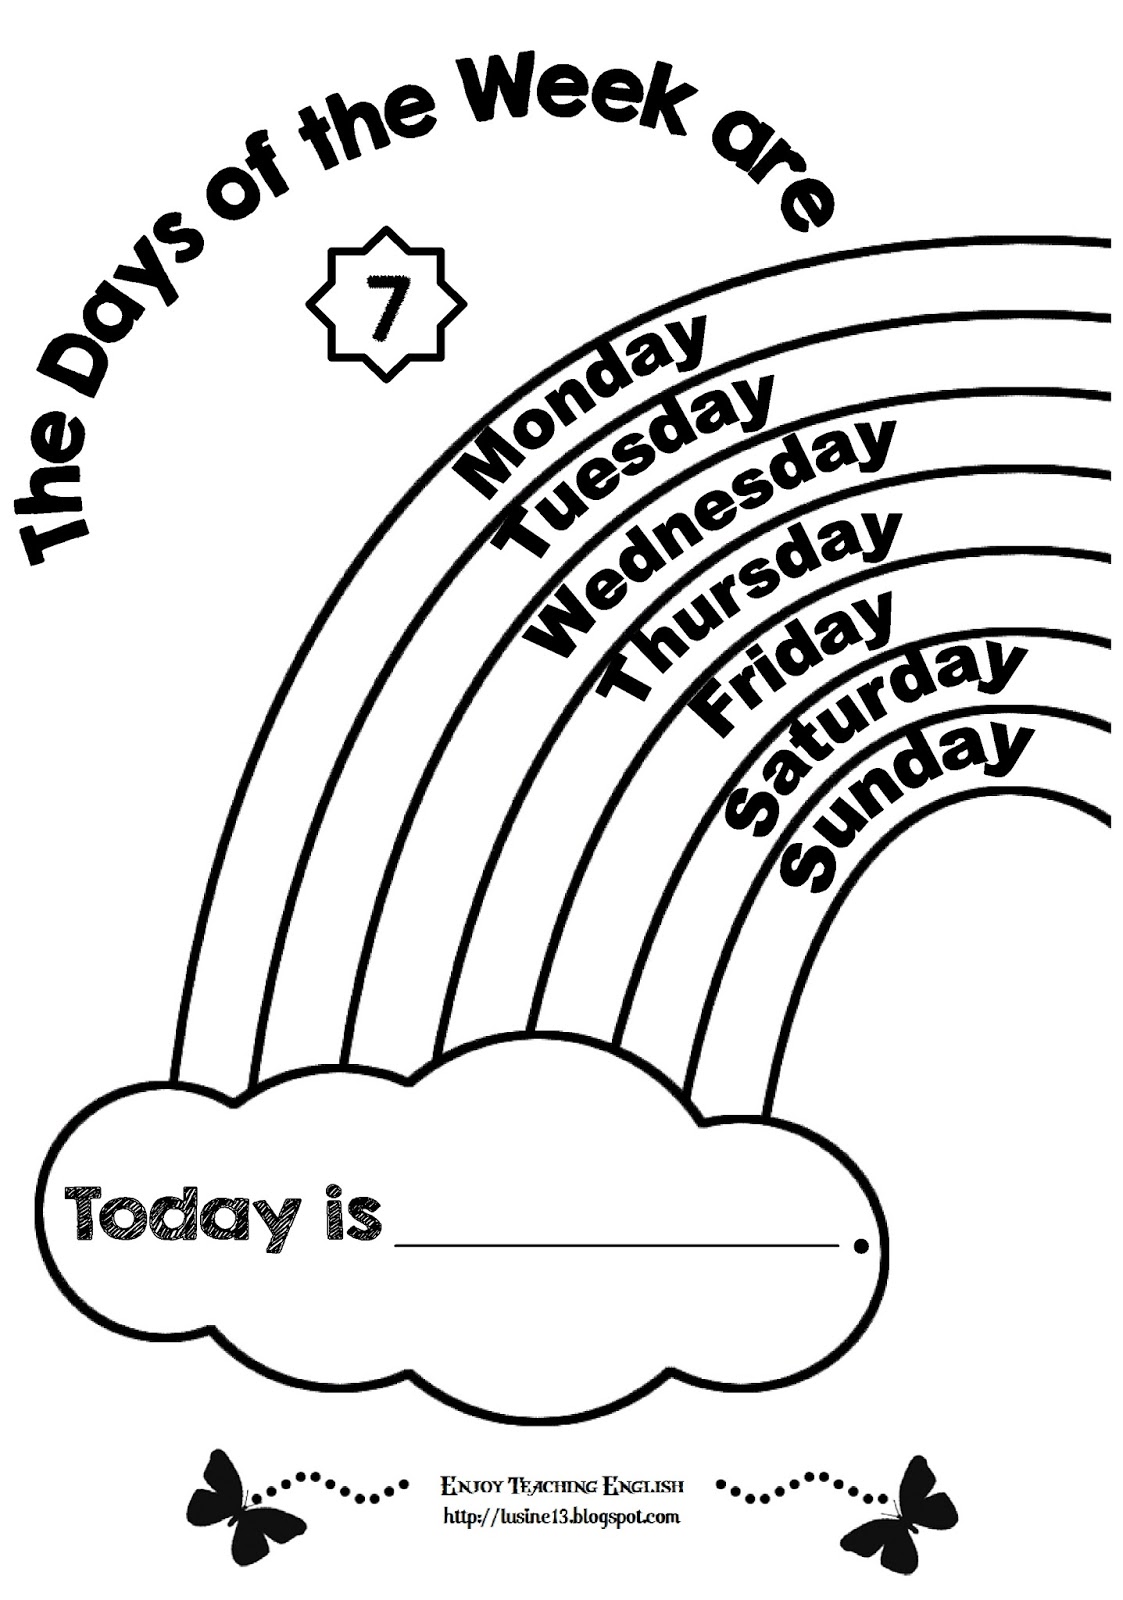 Days of the Week coloring worksheets